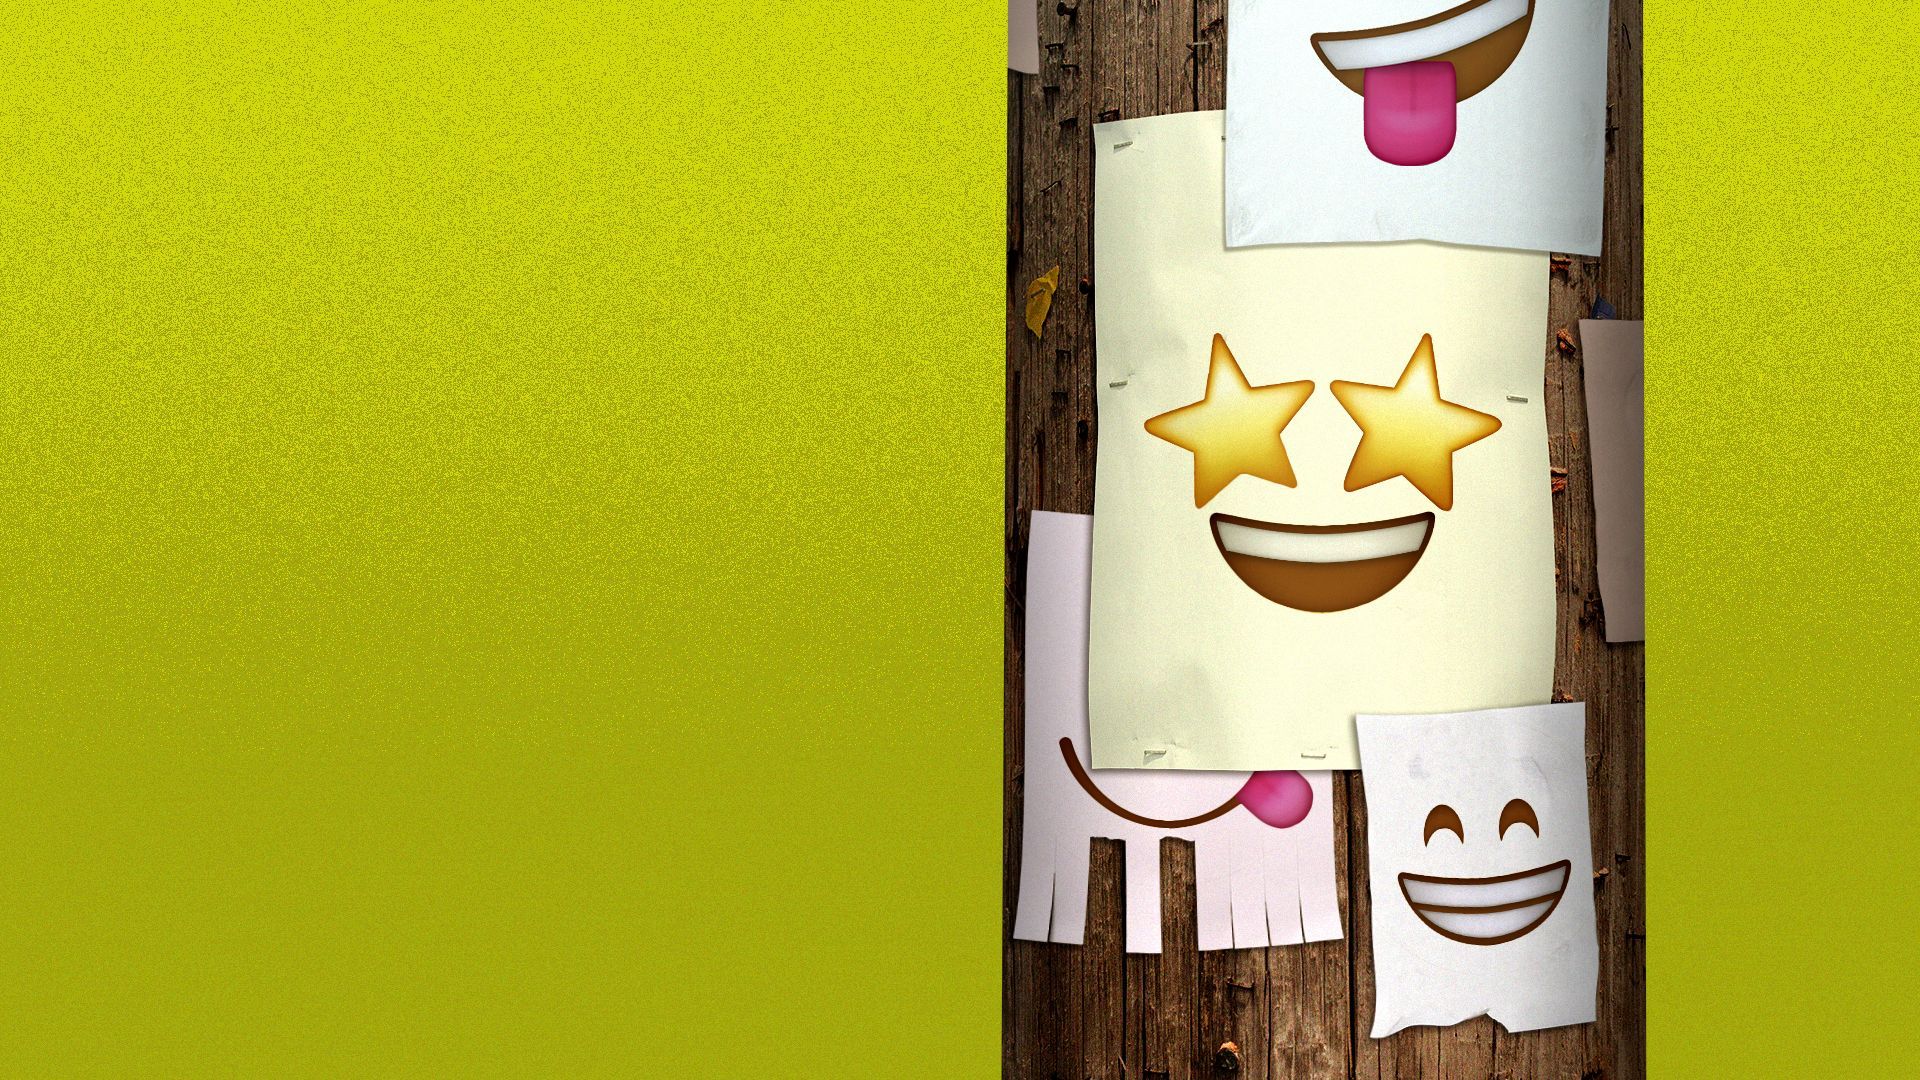 Illustration of posters and flyers with emojis on them, stapled to a telephone pole.